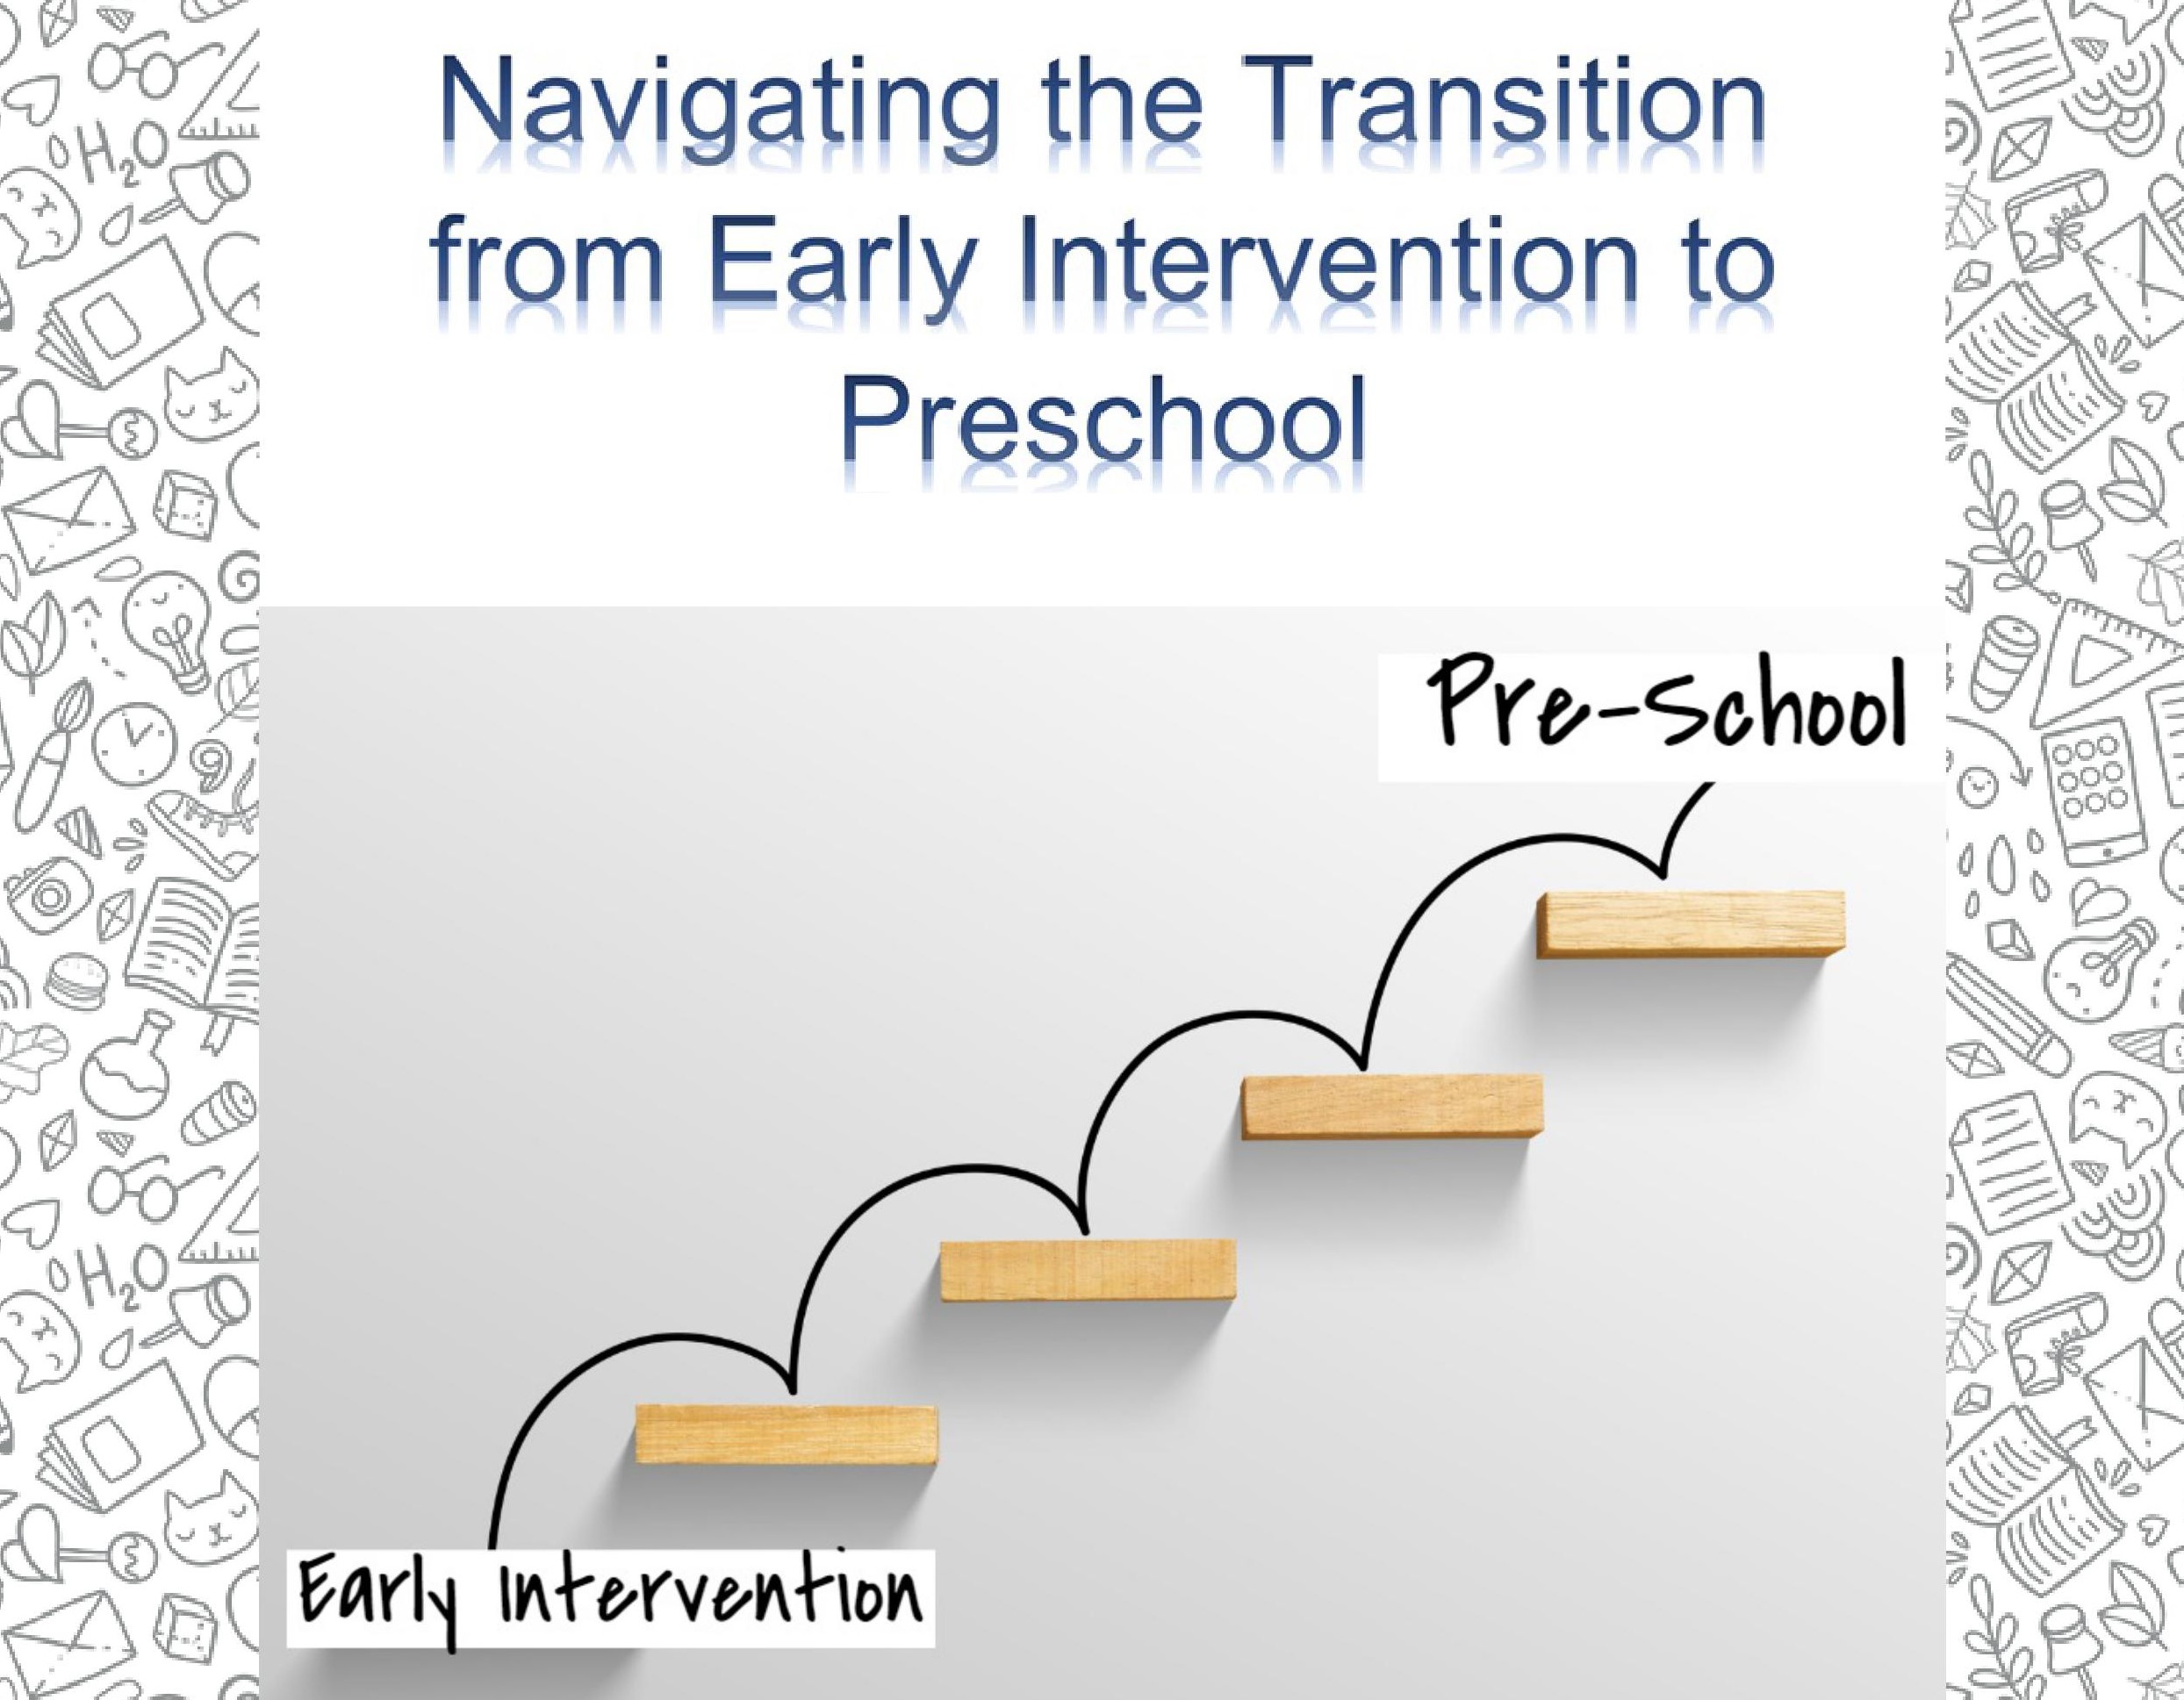 sideways view of steps with a line connecting Early Intervention at the bottom and pre-school at the top and text that reads "Navigating the Transition from Early Intervention to Preschool"